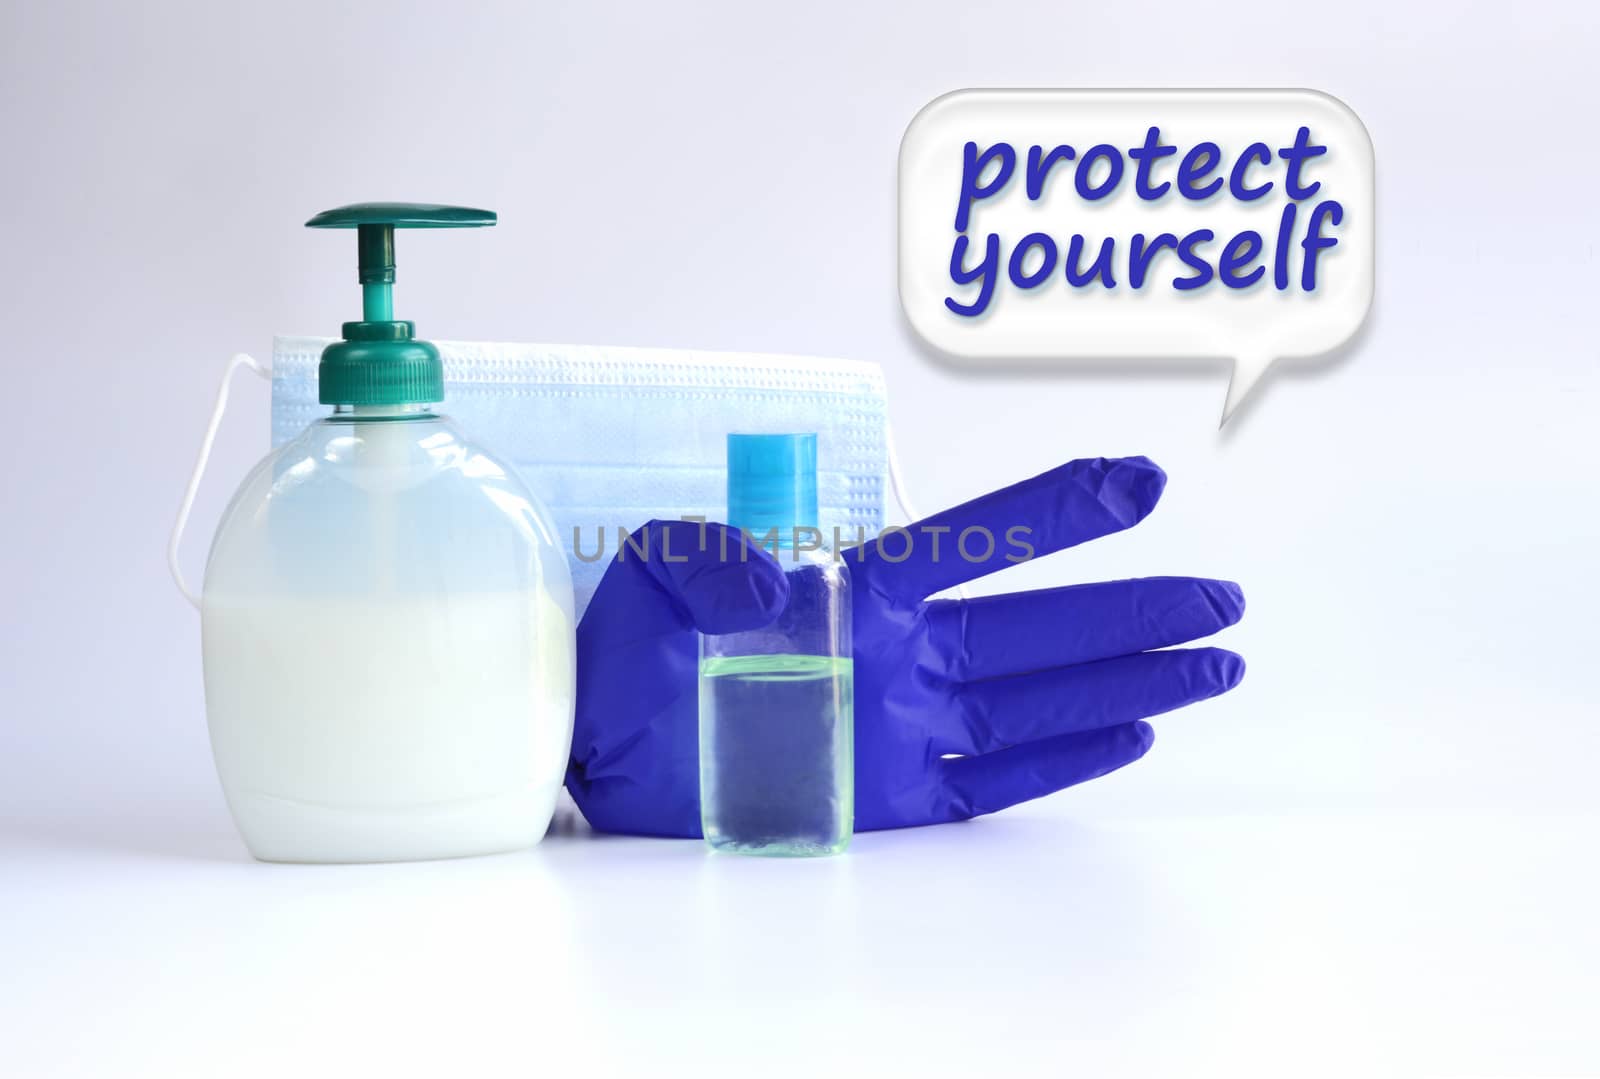 Protective face mask, soap, antiseptic, gloves against virus on white background. Protect your self words on spech bubble